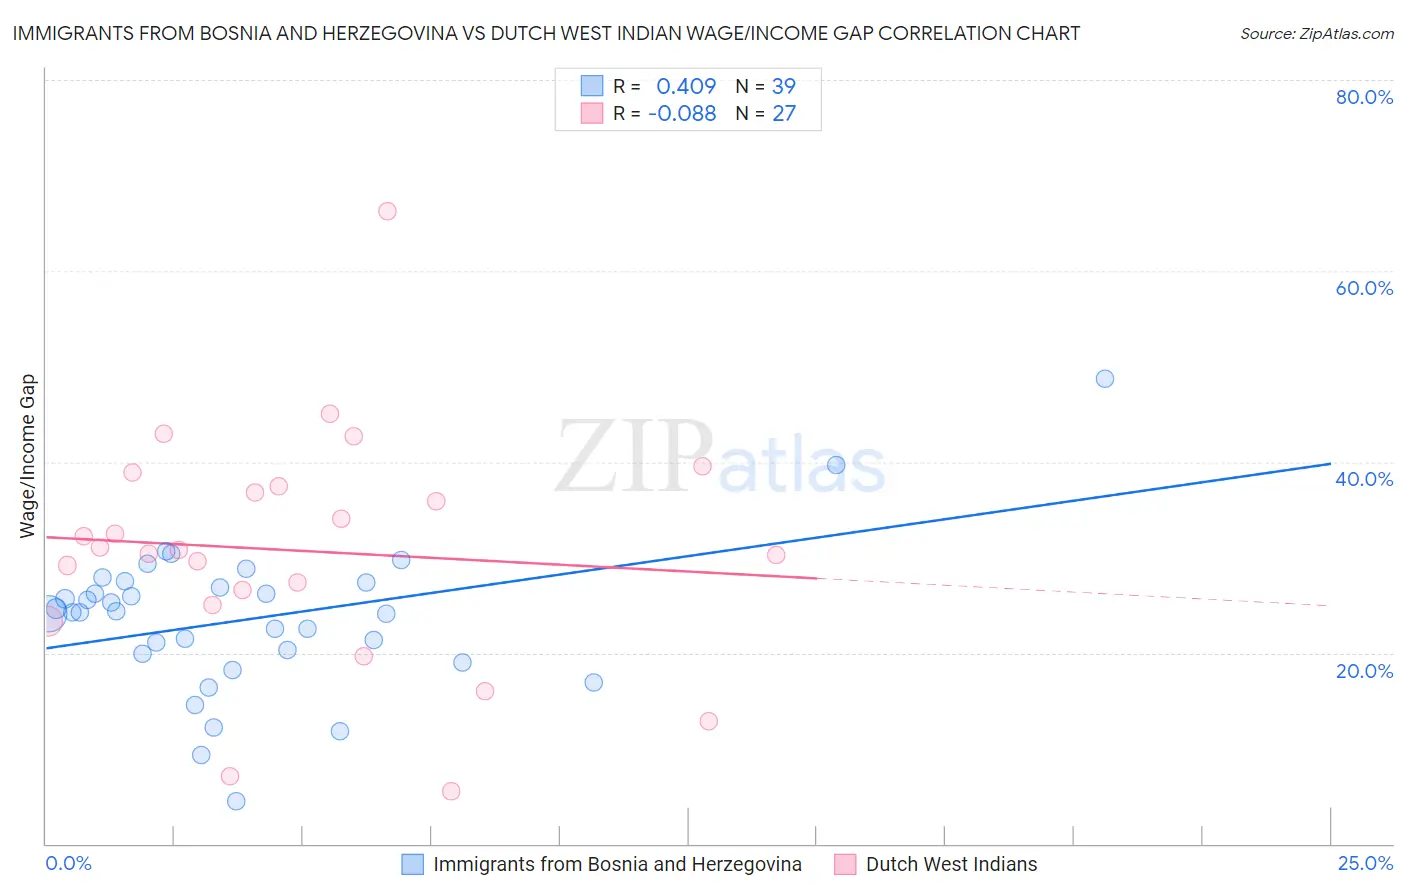 Immigrants from Bosnia and Herzegovina vs Dutch West Indian Wage/Income Gap